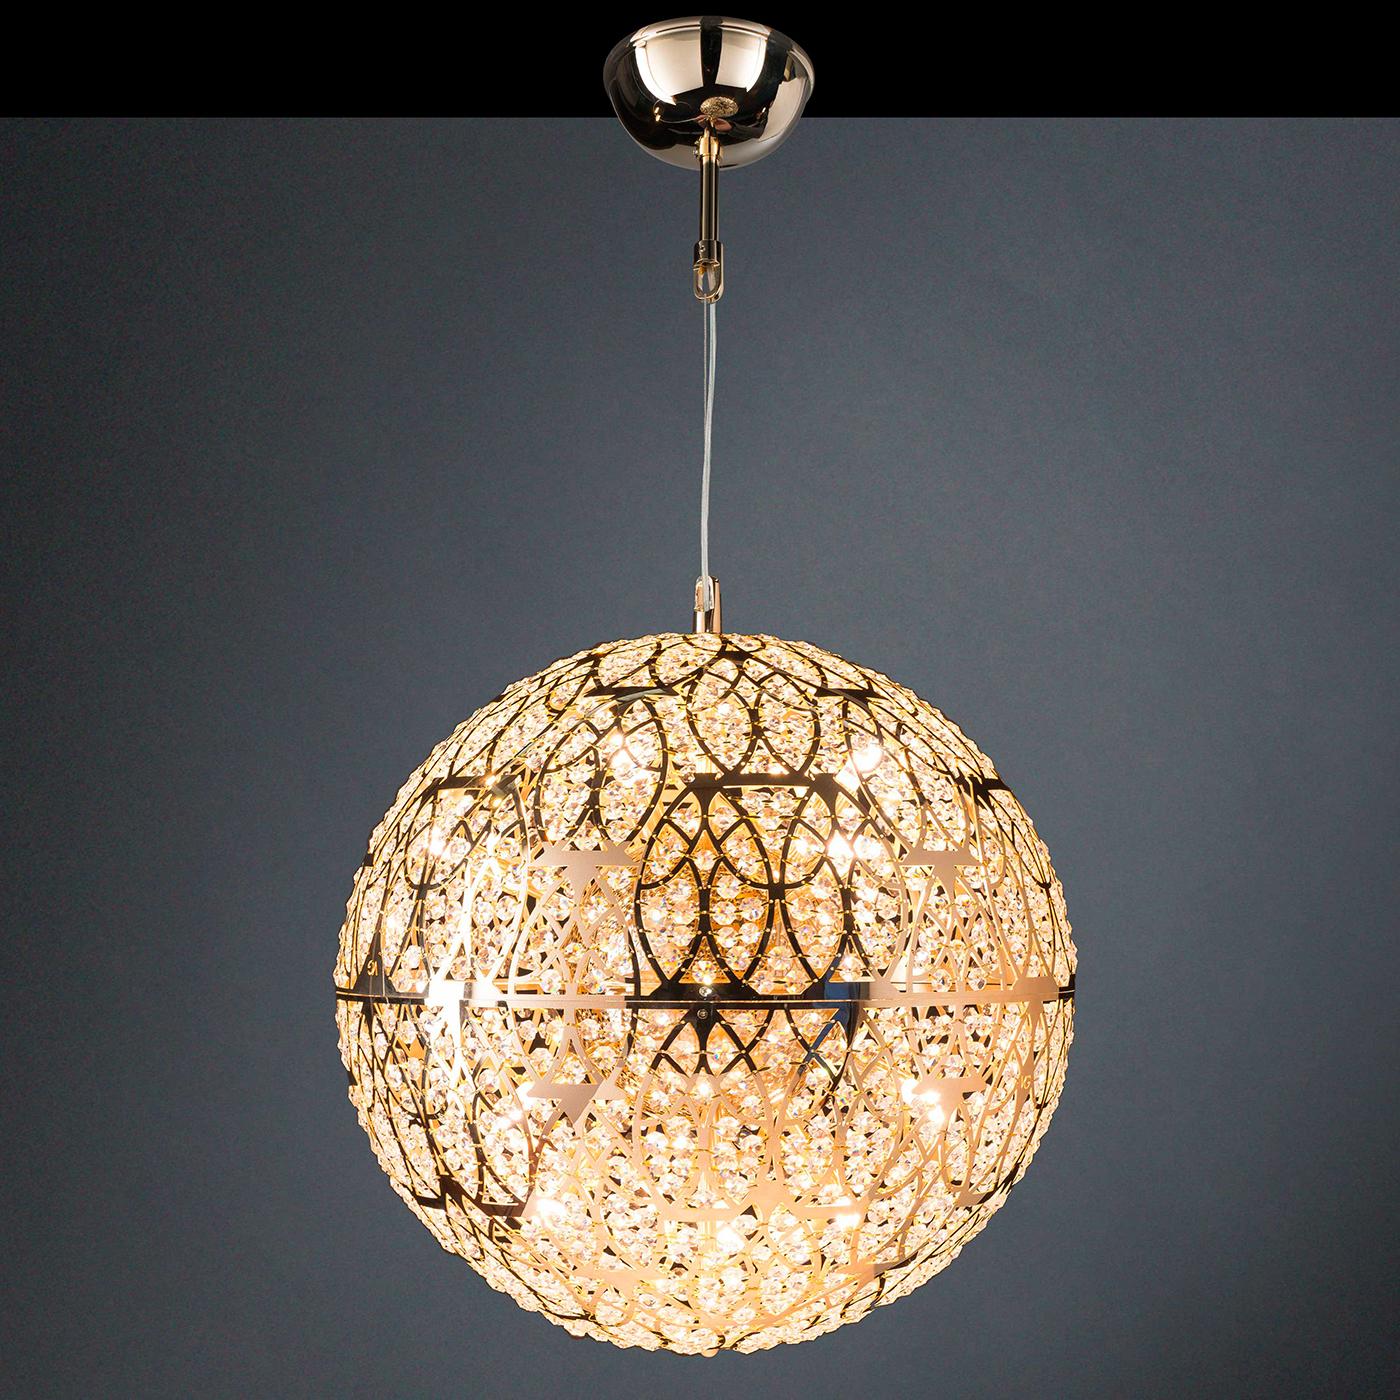 A superb object of functional decor, this pendant lamp celebrates light in a perfect spherical shape. It is crafted of glossy chrome-finished steel elements waded together and functioning both as supporting structure and mounting for the myriad of